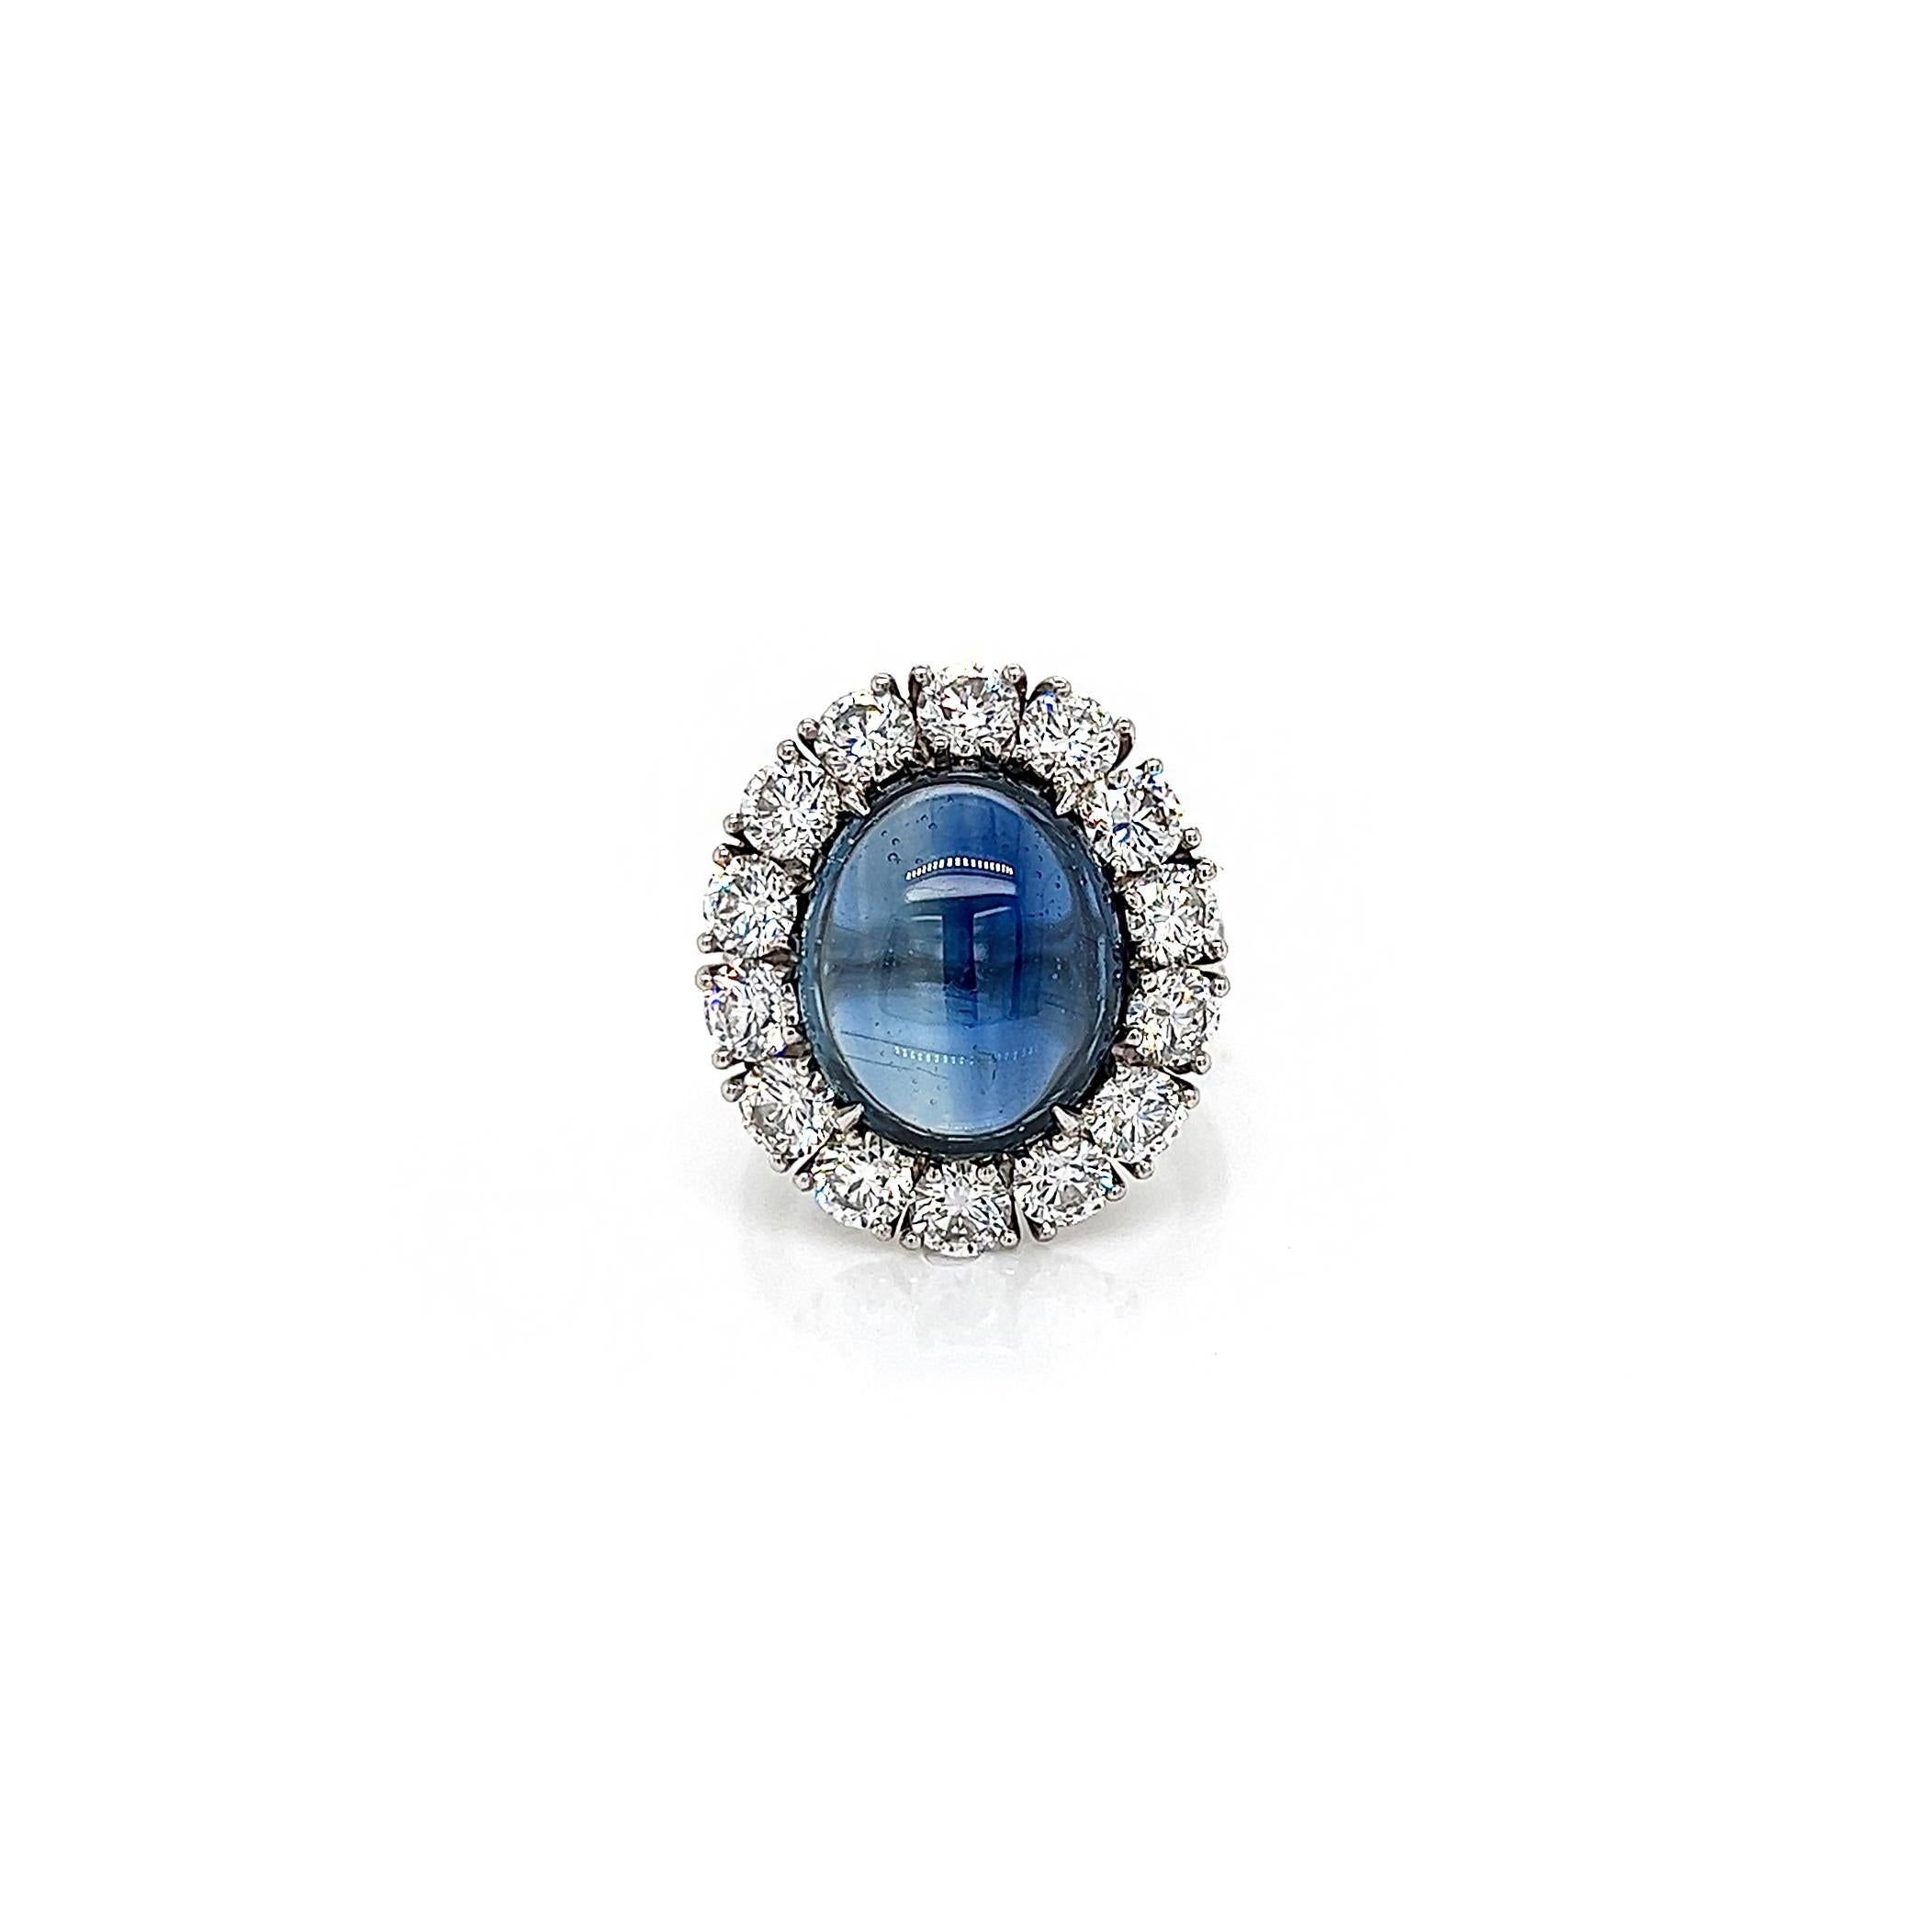 12.92 Total Carat NO HEAT Sapphire and Diamond Halo Pave-Set Ladies Ring. GIA Certified

Distinctly glamorous, this sapphire and diamond ring showcases a 9.77 Carat deep blue UNHEATED natural sapphire. The mesmerizing 9.77 Carat Sapphire offers so